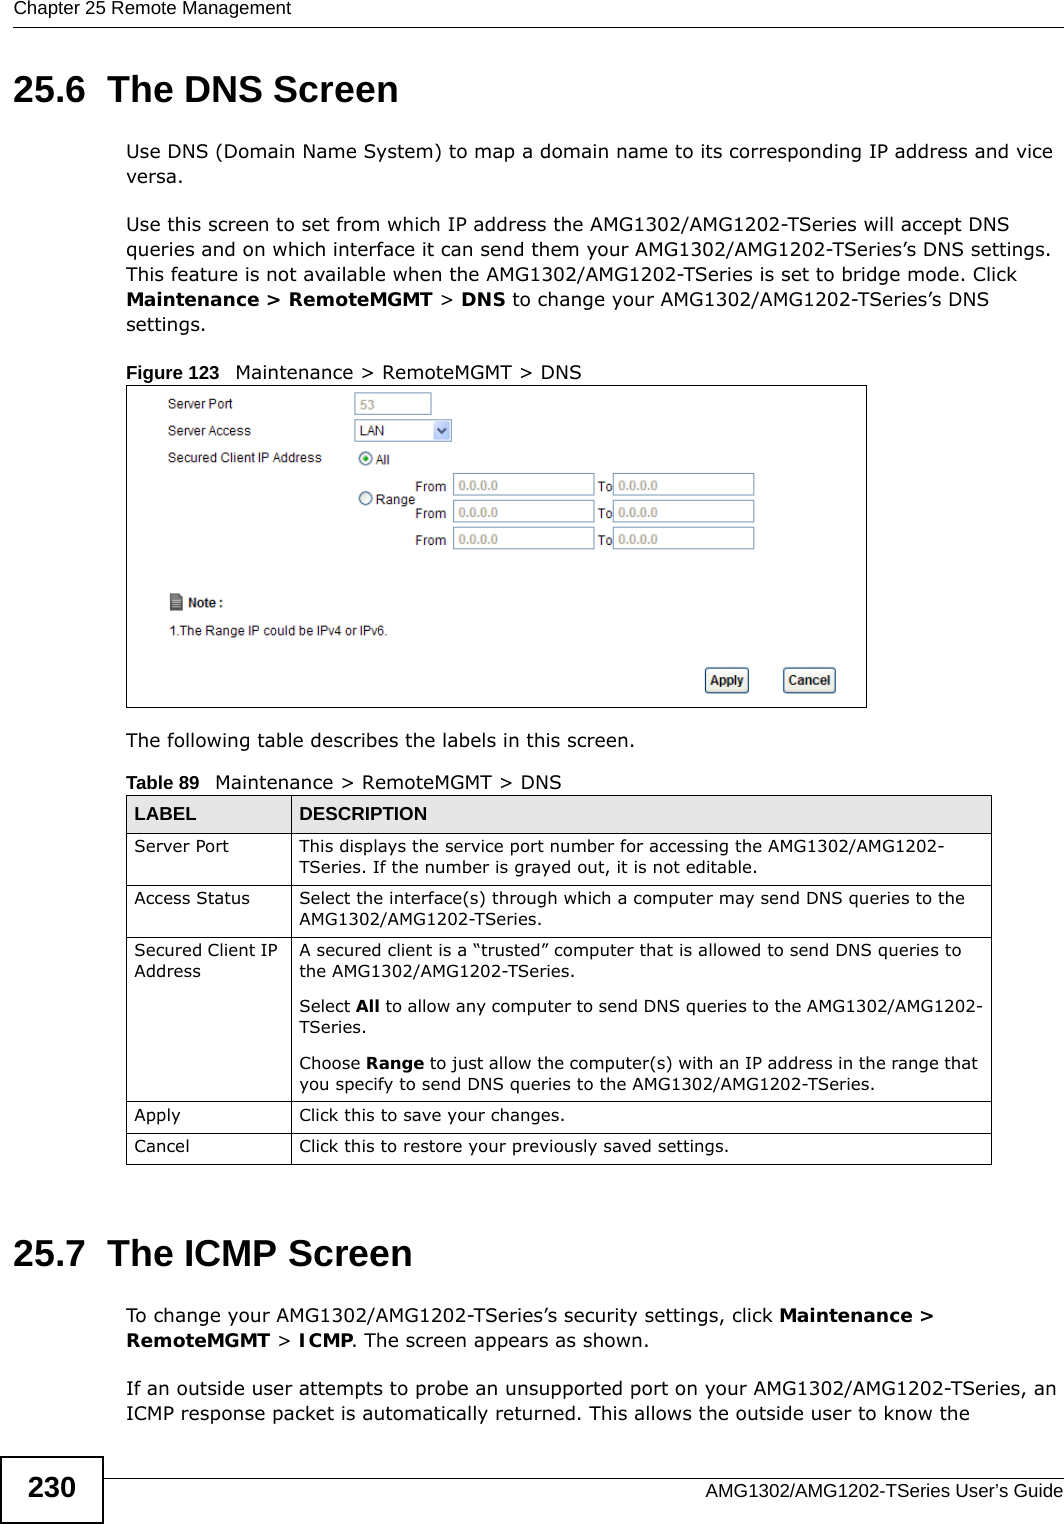 Chapter 25 Remote ManagementAMG1302/AMG1202-TSeries User’s Guide23025.6  The DNS Screen Use DNS (Domain Name System) to map a domain name to its corresponding IP address and vice versa.Use this screen to set from which IP address the AMG1302/AMG1202-TSeries will accept DNS queries and on which interface it can send them your AMG1302/AMG1202-TSeries’s DNS settings. This feature is not available when the AMG1302/AMG1202-TSeries is set to bridge mode. Click Maintenance &gt; RemoteMGMT &gt; DNS to change your AMG1302/AMG1202-TSeries’s DNS settings.Figure 123   Maintenance &gt; RemoteMGMT &gt; DNSThe following table describes the labels in this screen.25.7  The ICMP ScreenTo change your AMG1302/AMG1202-TSeries’s security settings, click Maintenance &gt; RemoteMGMT &gt; ICMP. The screen appears as shown.If an outside user attempts to probe an unsupported port on your AMG1302/AMG1202-TSeries, an ICMP response packet is automatically returned. This allows the outside user to know the Table 89   Maintenance &gt; RemoteMGMT &gt; DNSLABEL DESCRIPTIONServer Port This displays the service port number for accessing the AMG1302/AMG1202-TSeries. If the number is grayed out, it is not editable.Access Status Select the interface(s) through which a computer may send DNS queries to the AMG1302/AMG1202-TSeries.Secured Client IP AddressA secured client is a “trusted” computer that is allowed to send DNS queries to the AMG1302/AMG1202-TSeries.Select All to allow any computer to send DNS queries to the AMG1302/AMG1202-TSeries.Choose Range to just allow the computer(s) with an IP address in the range that you specify to send DNS queries to the AMG1302/AMG1202-TSeries.Apply Click this to save your changes.Cancel Click this to restore your previously saved settings.